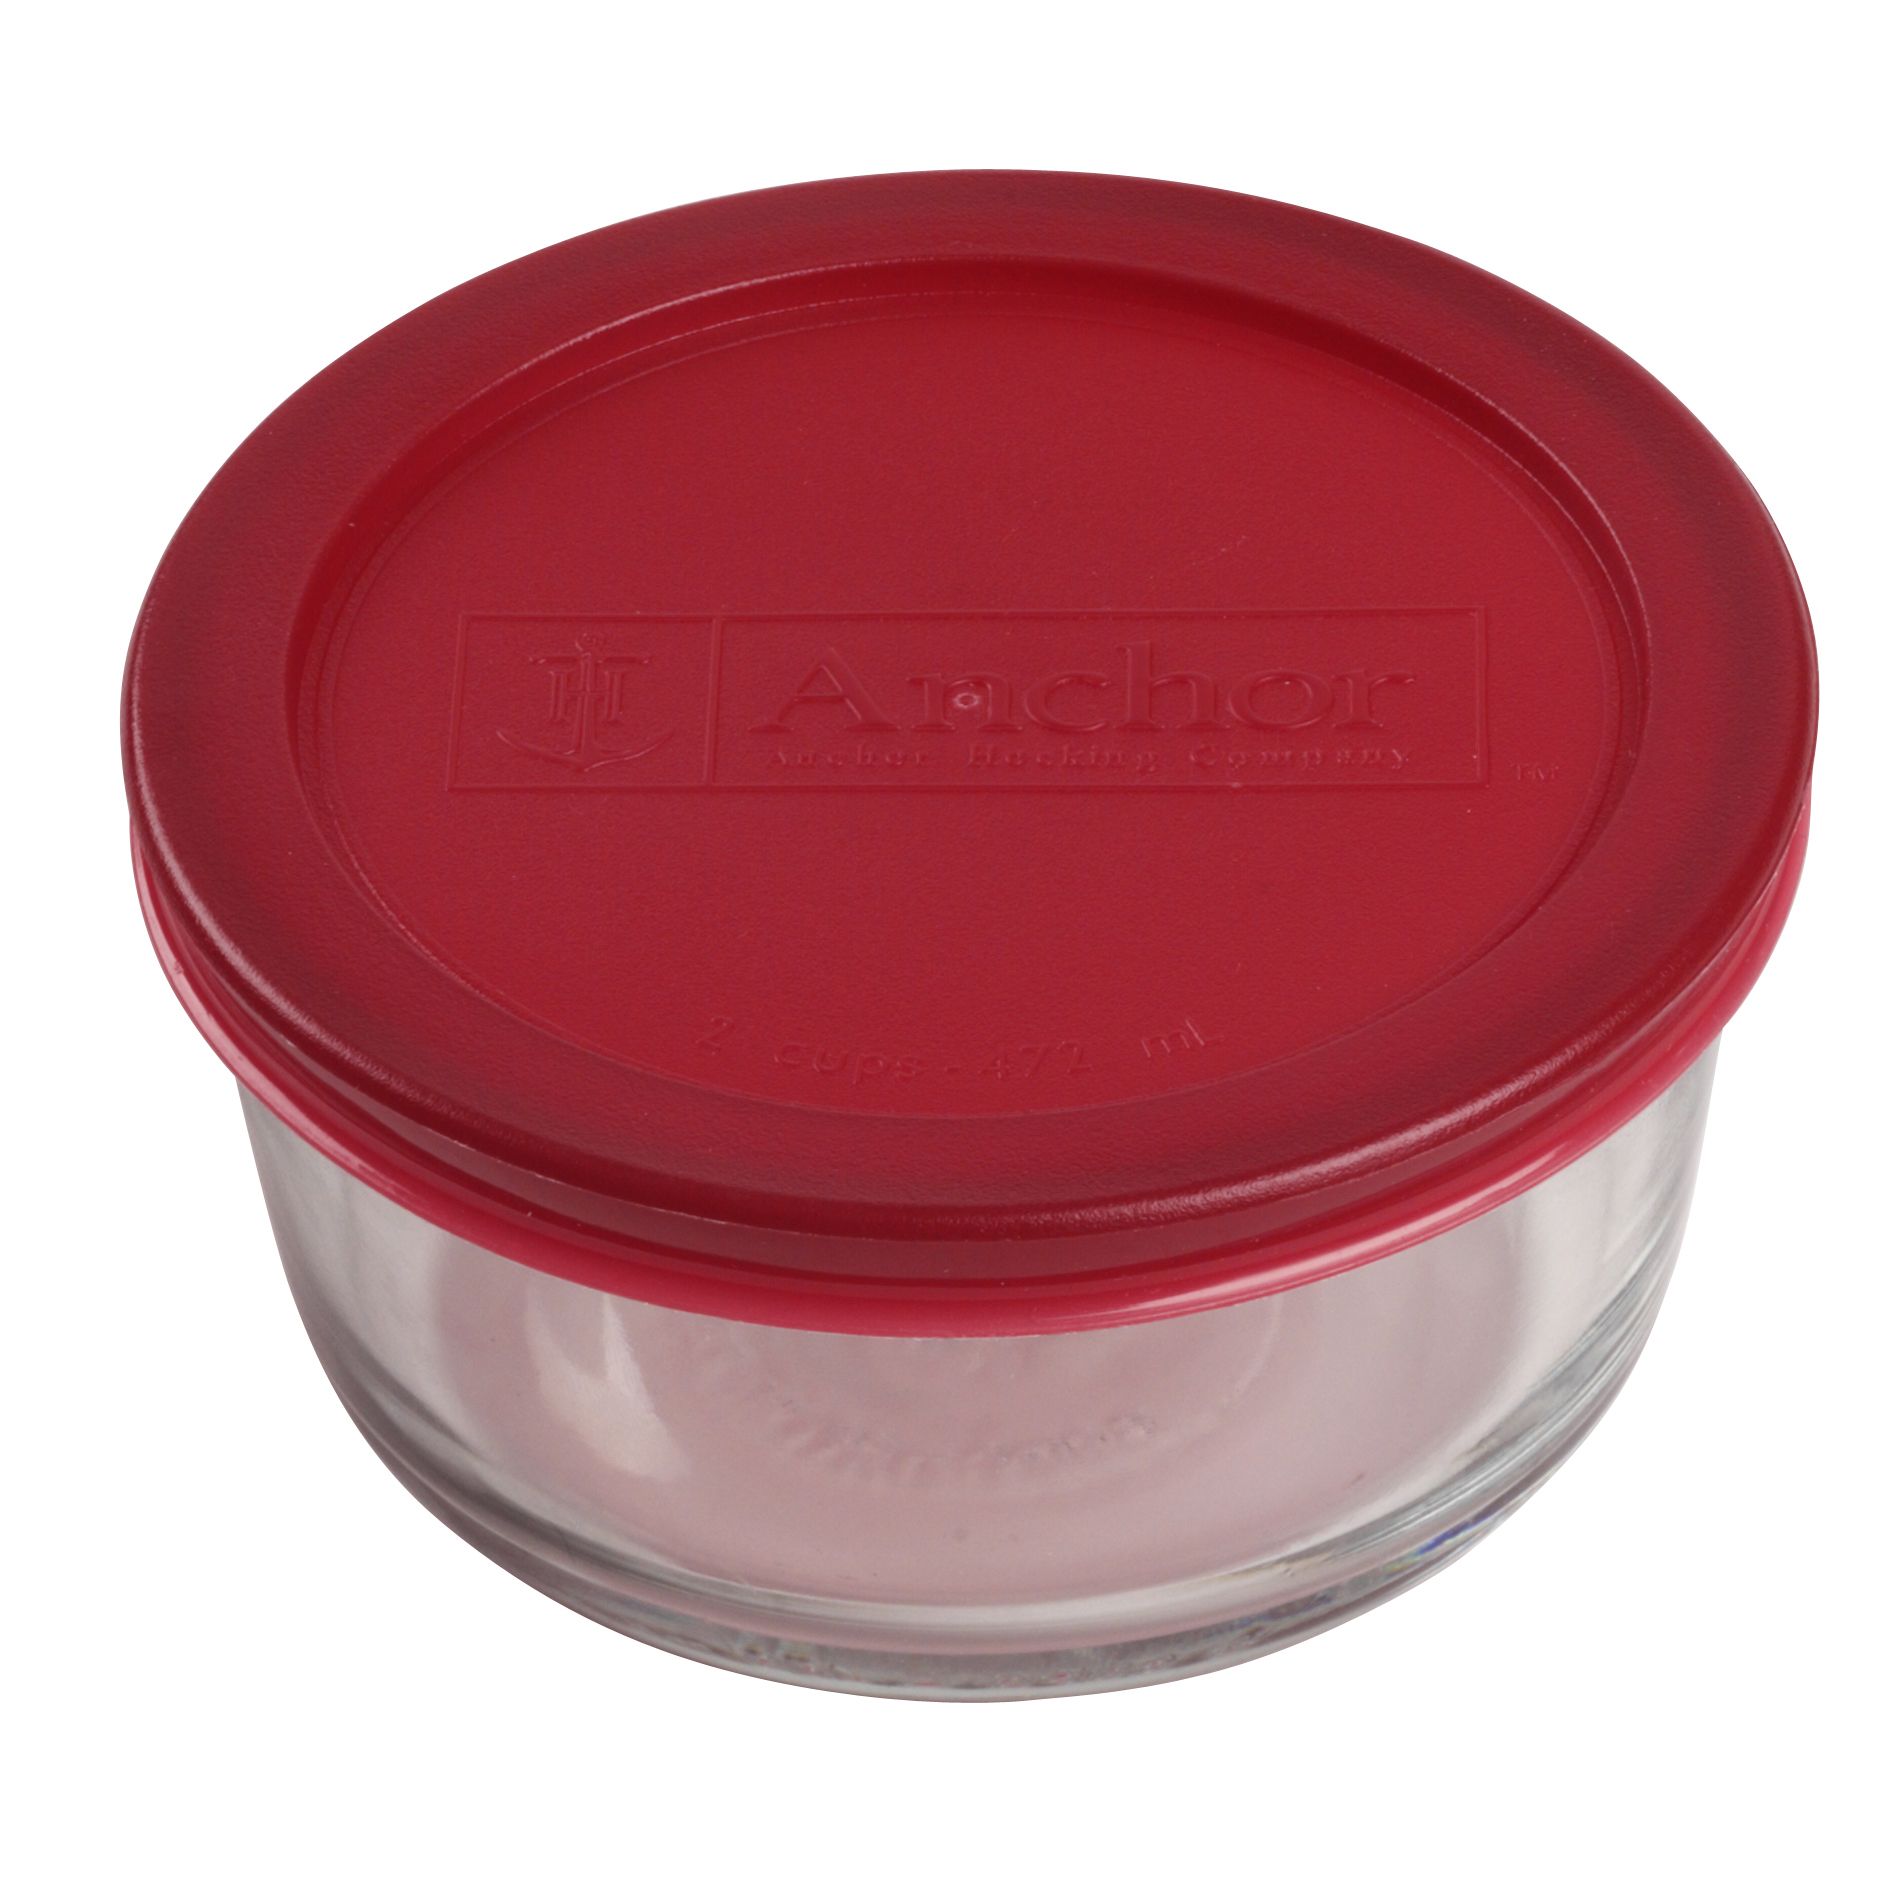 Anchor Hocking 2 Cup Round Bakeware With Red Lid